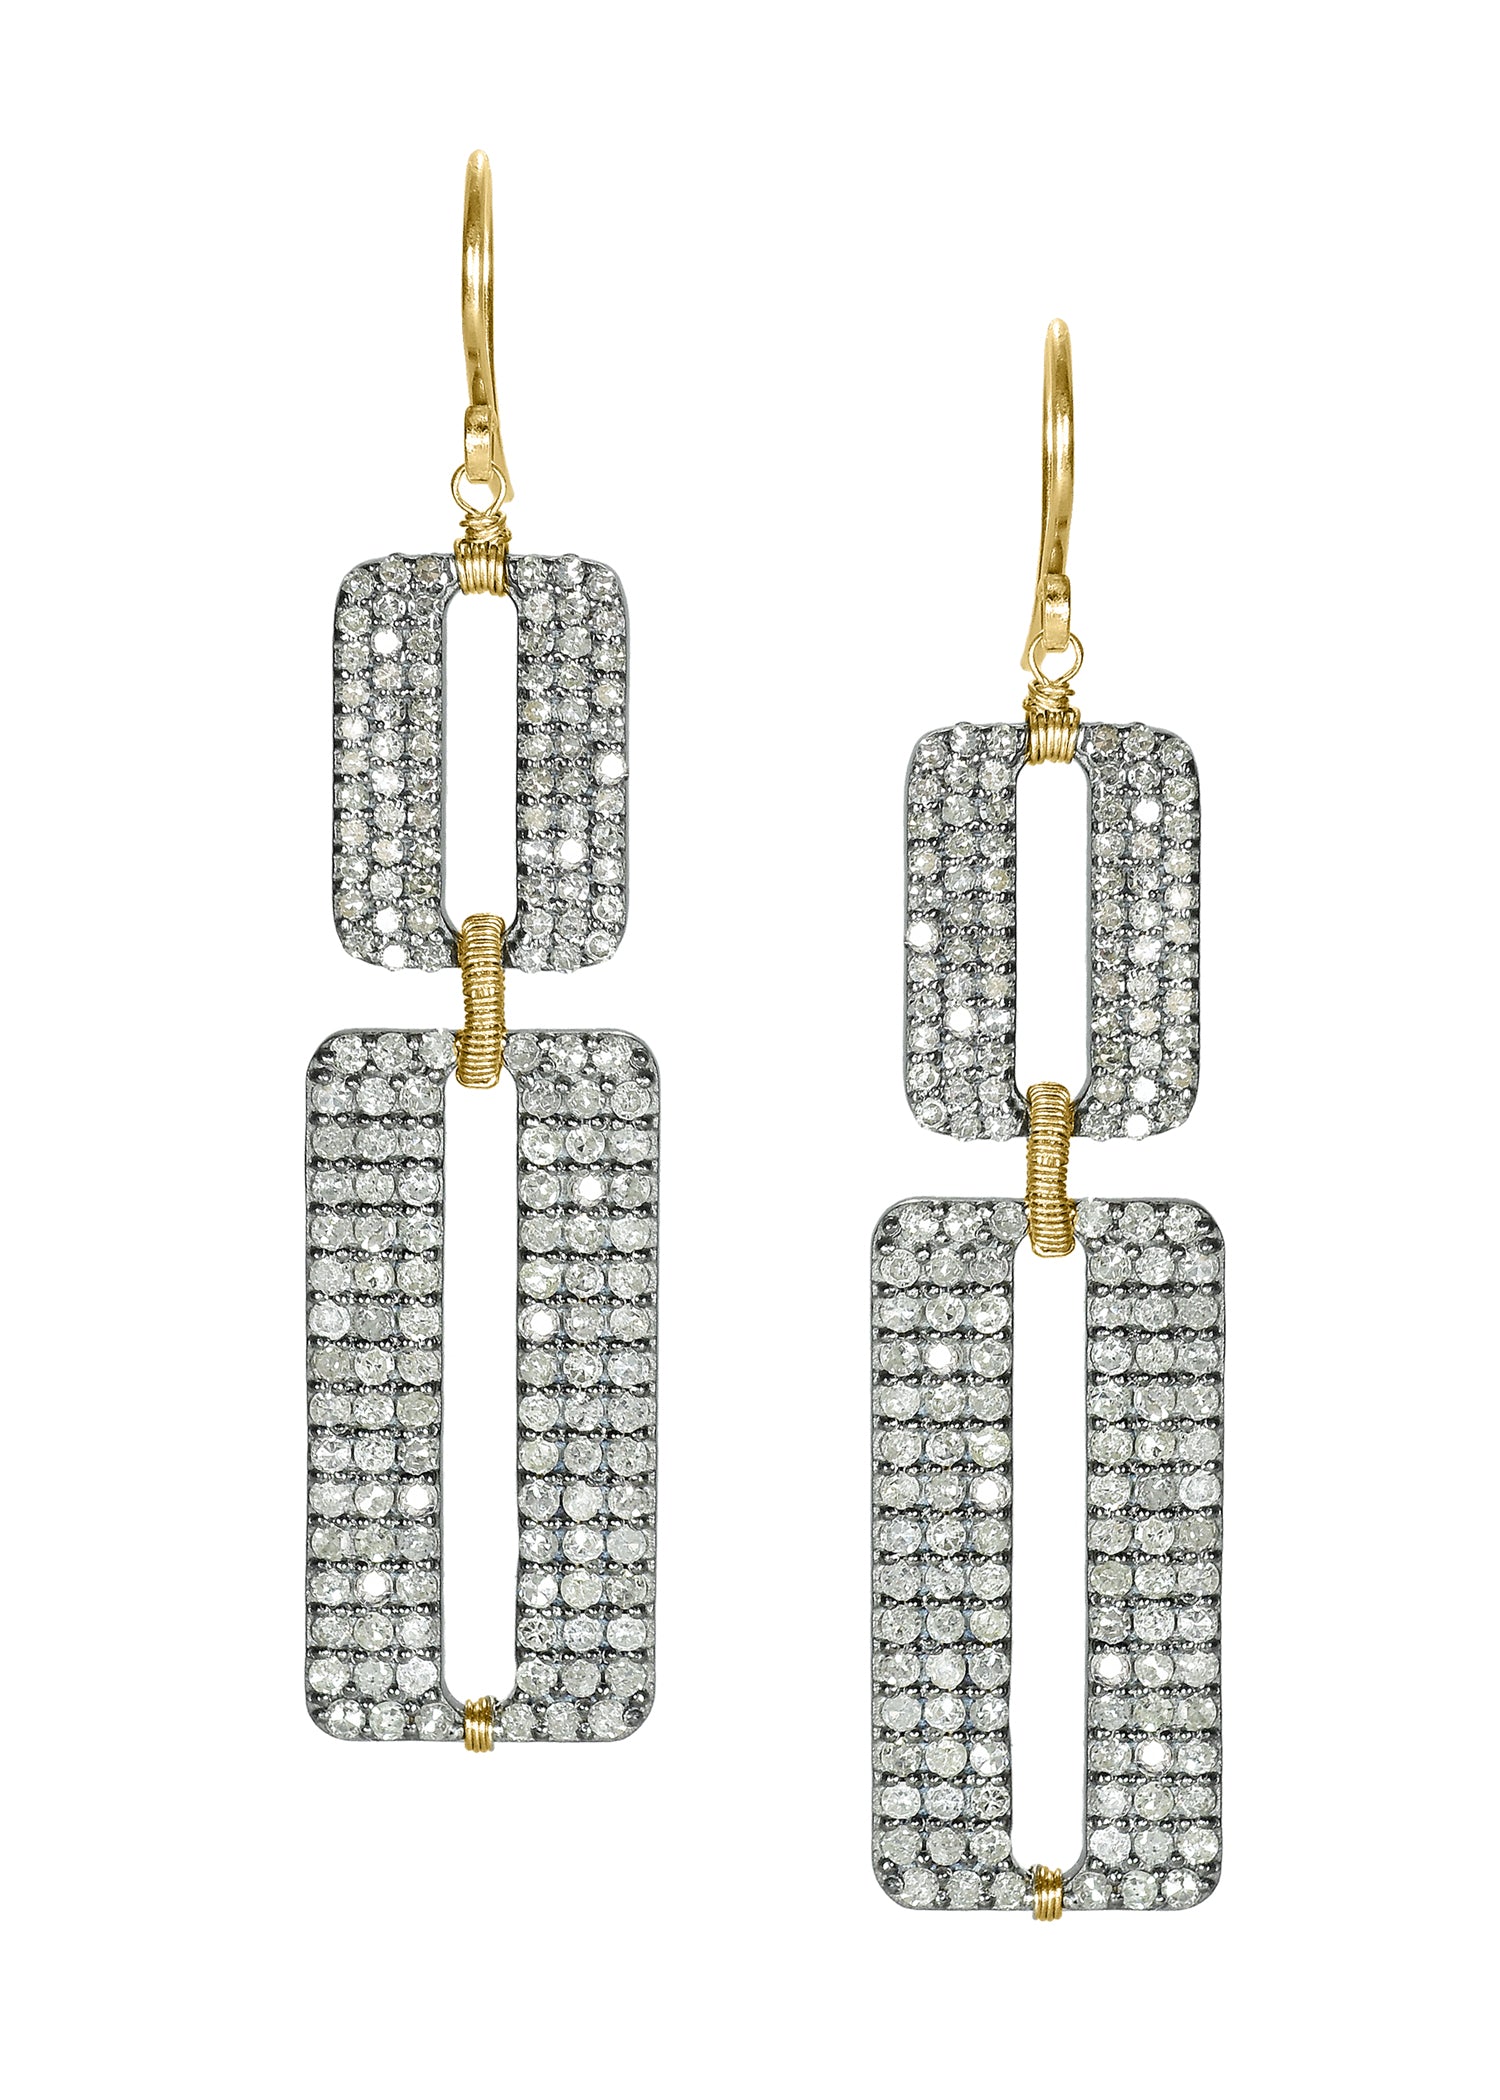 Diamond 14k gold Sterling silver Mixed metal Special order only Earrings measure 2-1/8" in length (including the ear wires) and 1/2" in width at the widest point Handmade in our Los Angeles studio